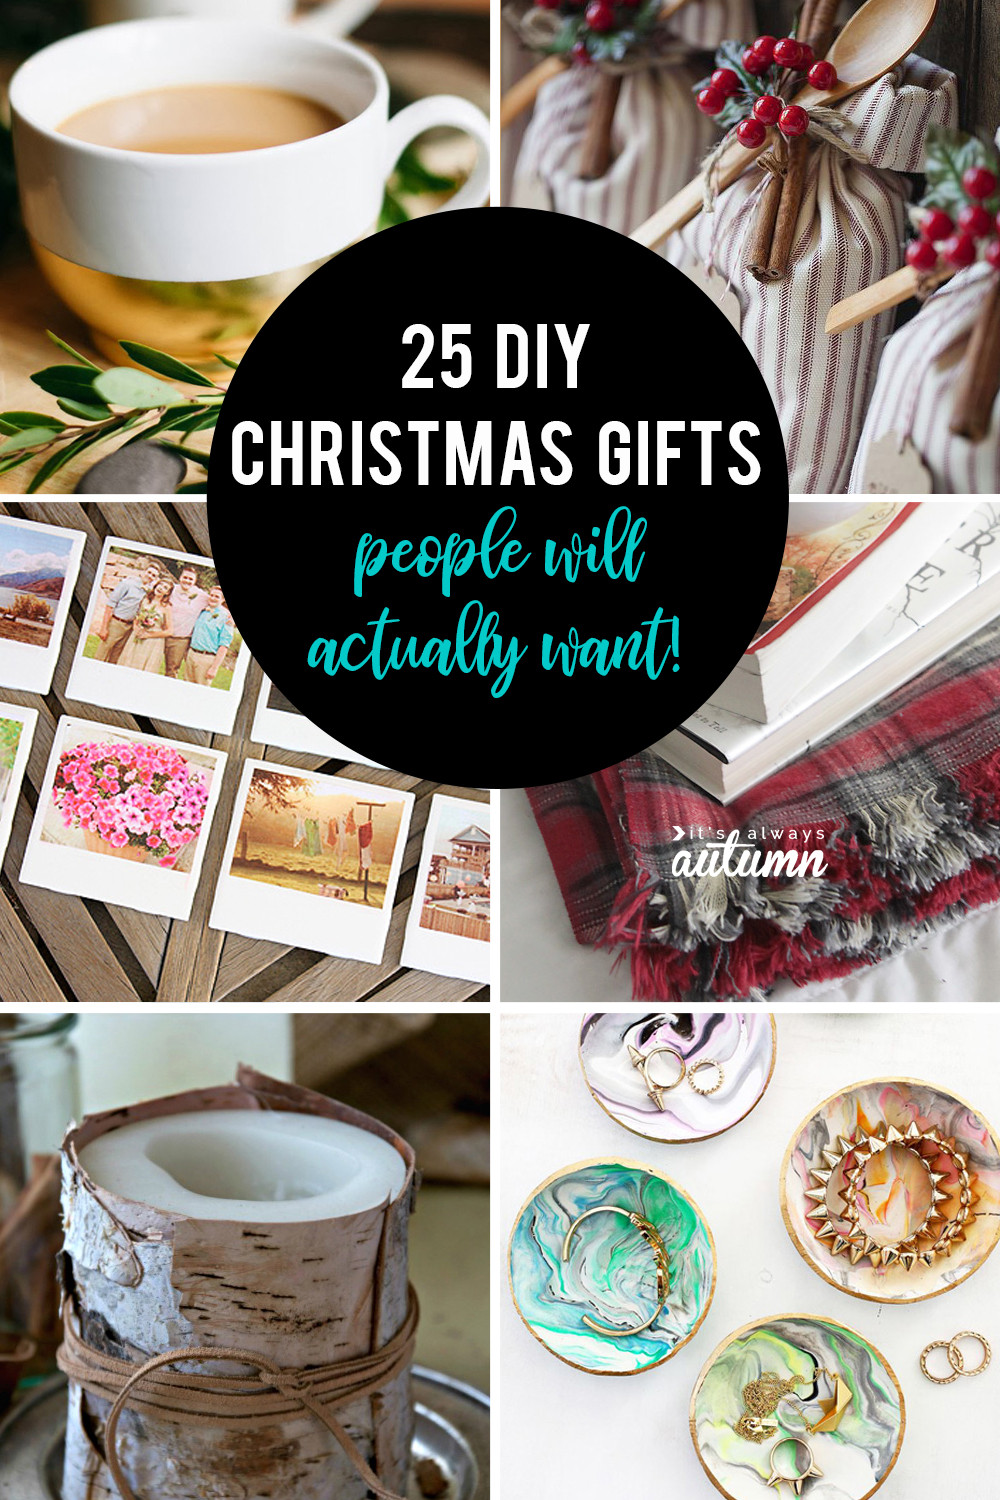 Good DIY Christmas Gifts
 25 amazing DIY ts people will actually want It s